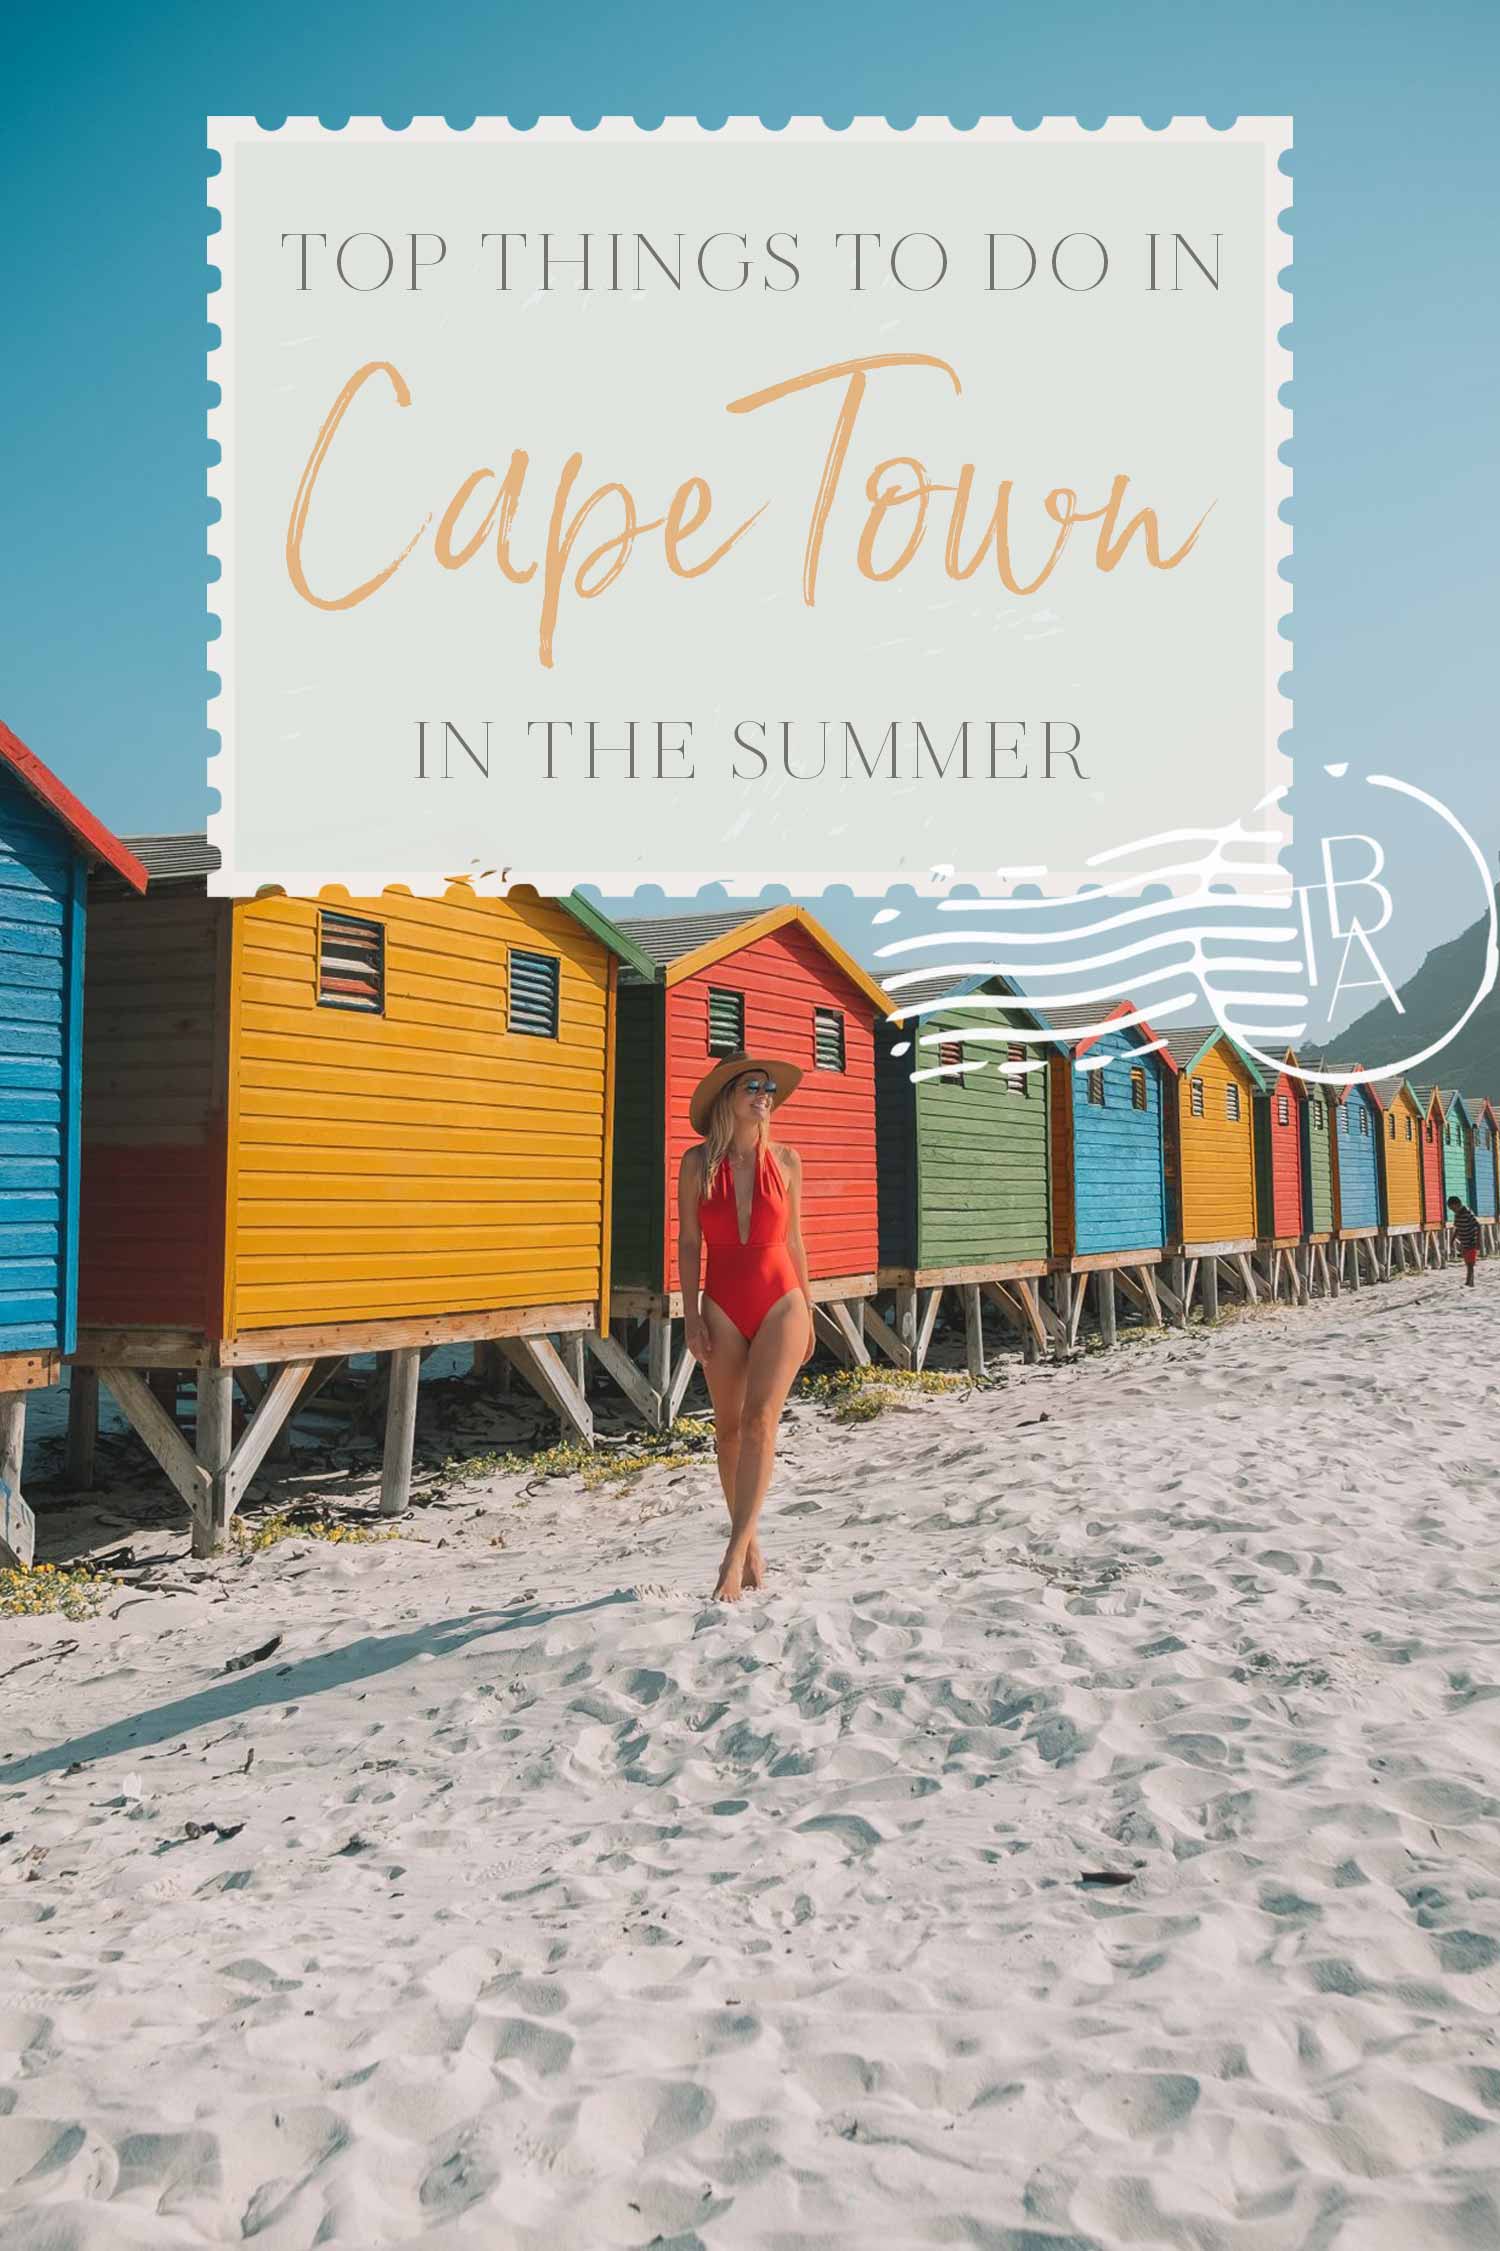 Top Things to Do in Cape Town in the Summer